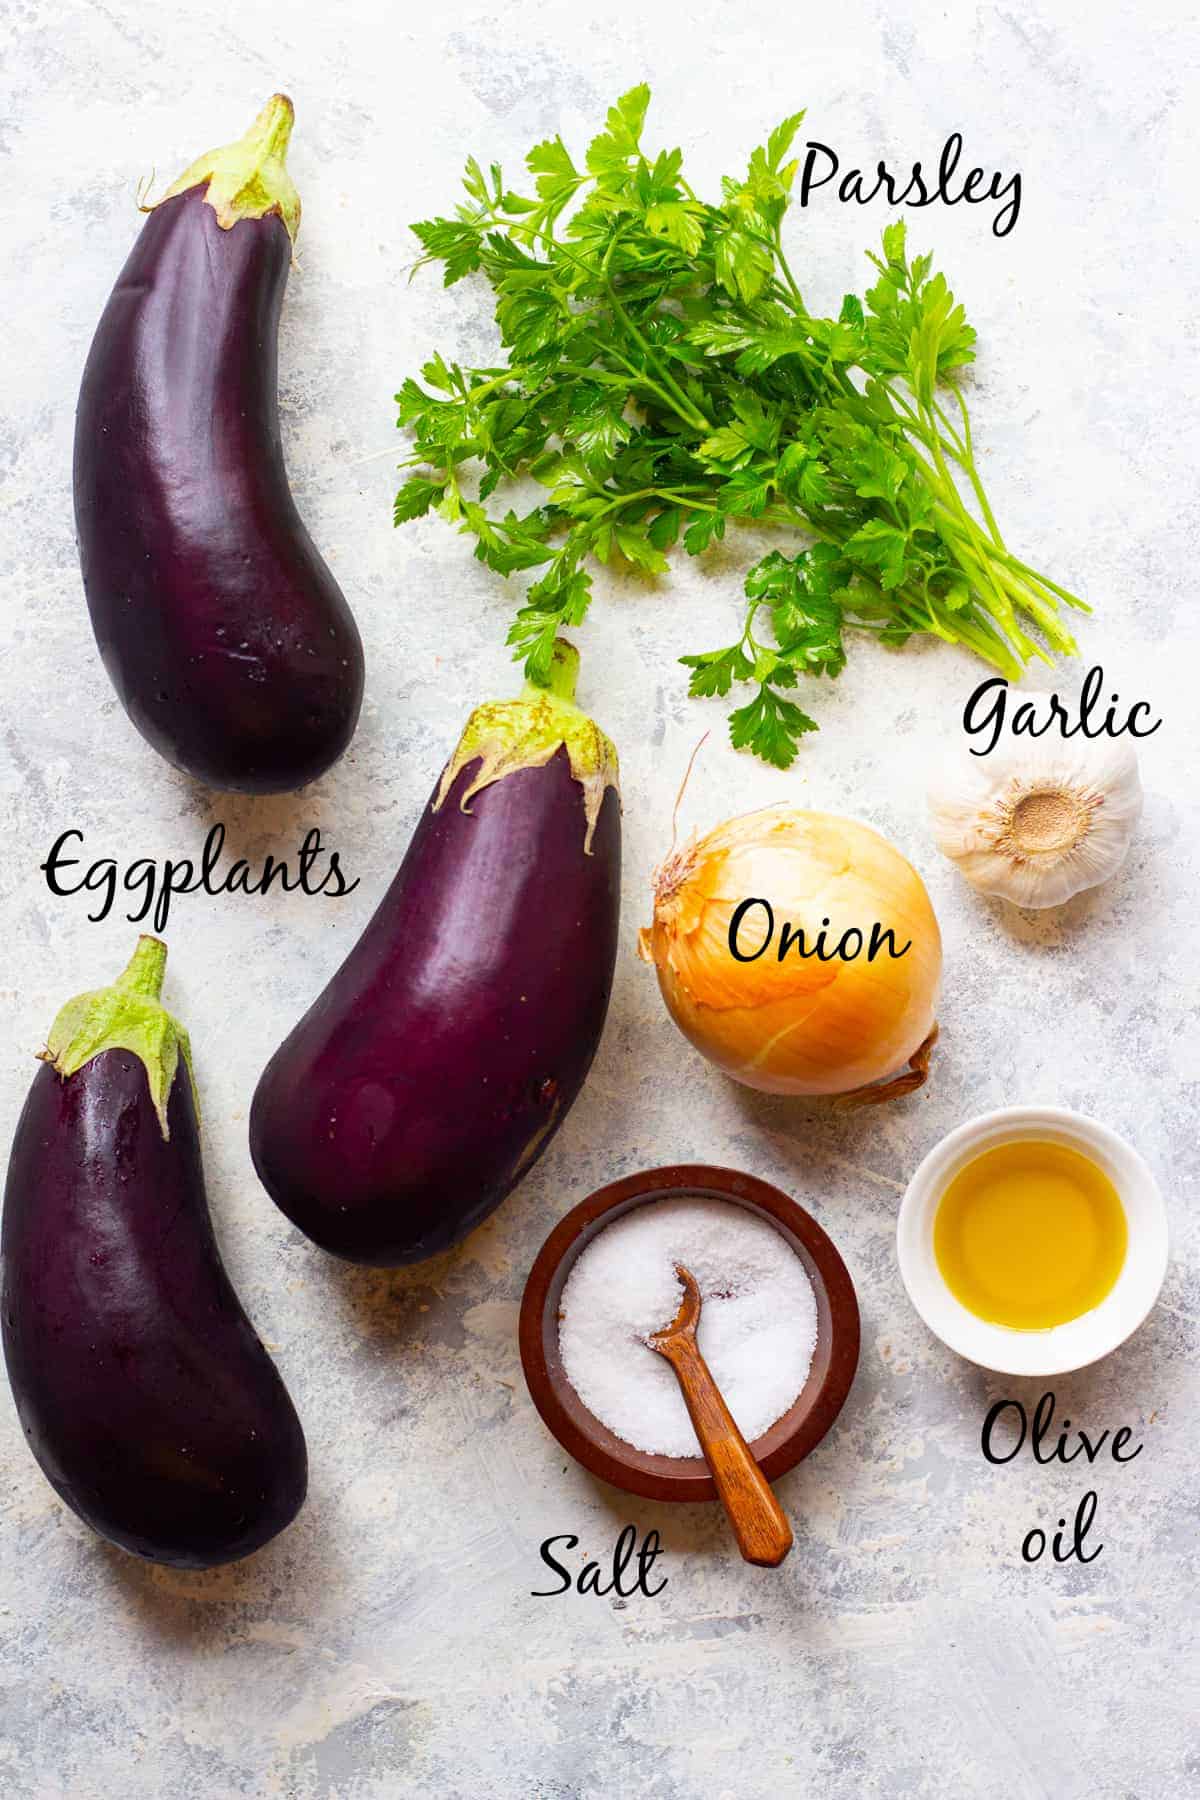 To make this recipe, you need eggplant, olive oil, onion, garlic, parsley, lemon juice, salt and pepper,